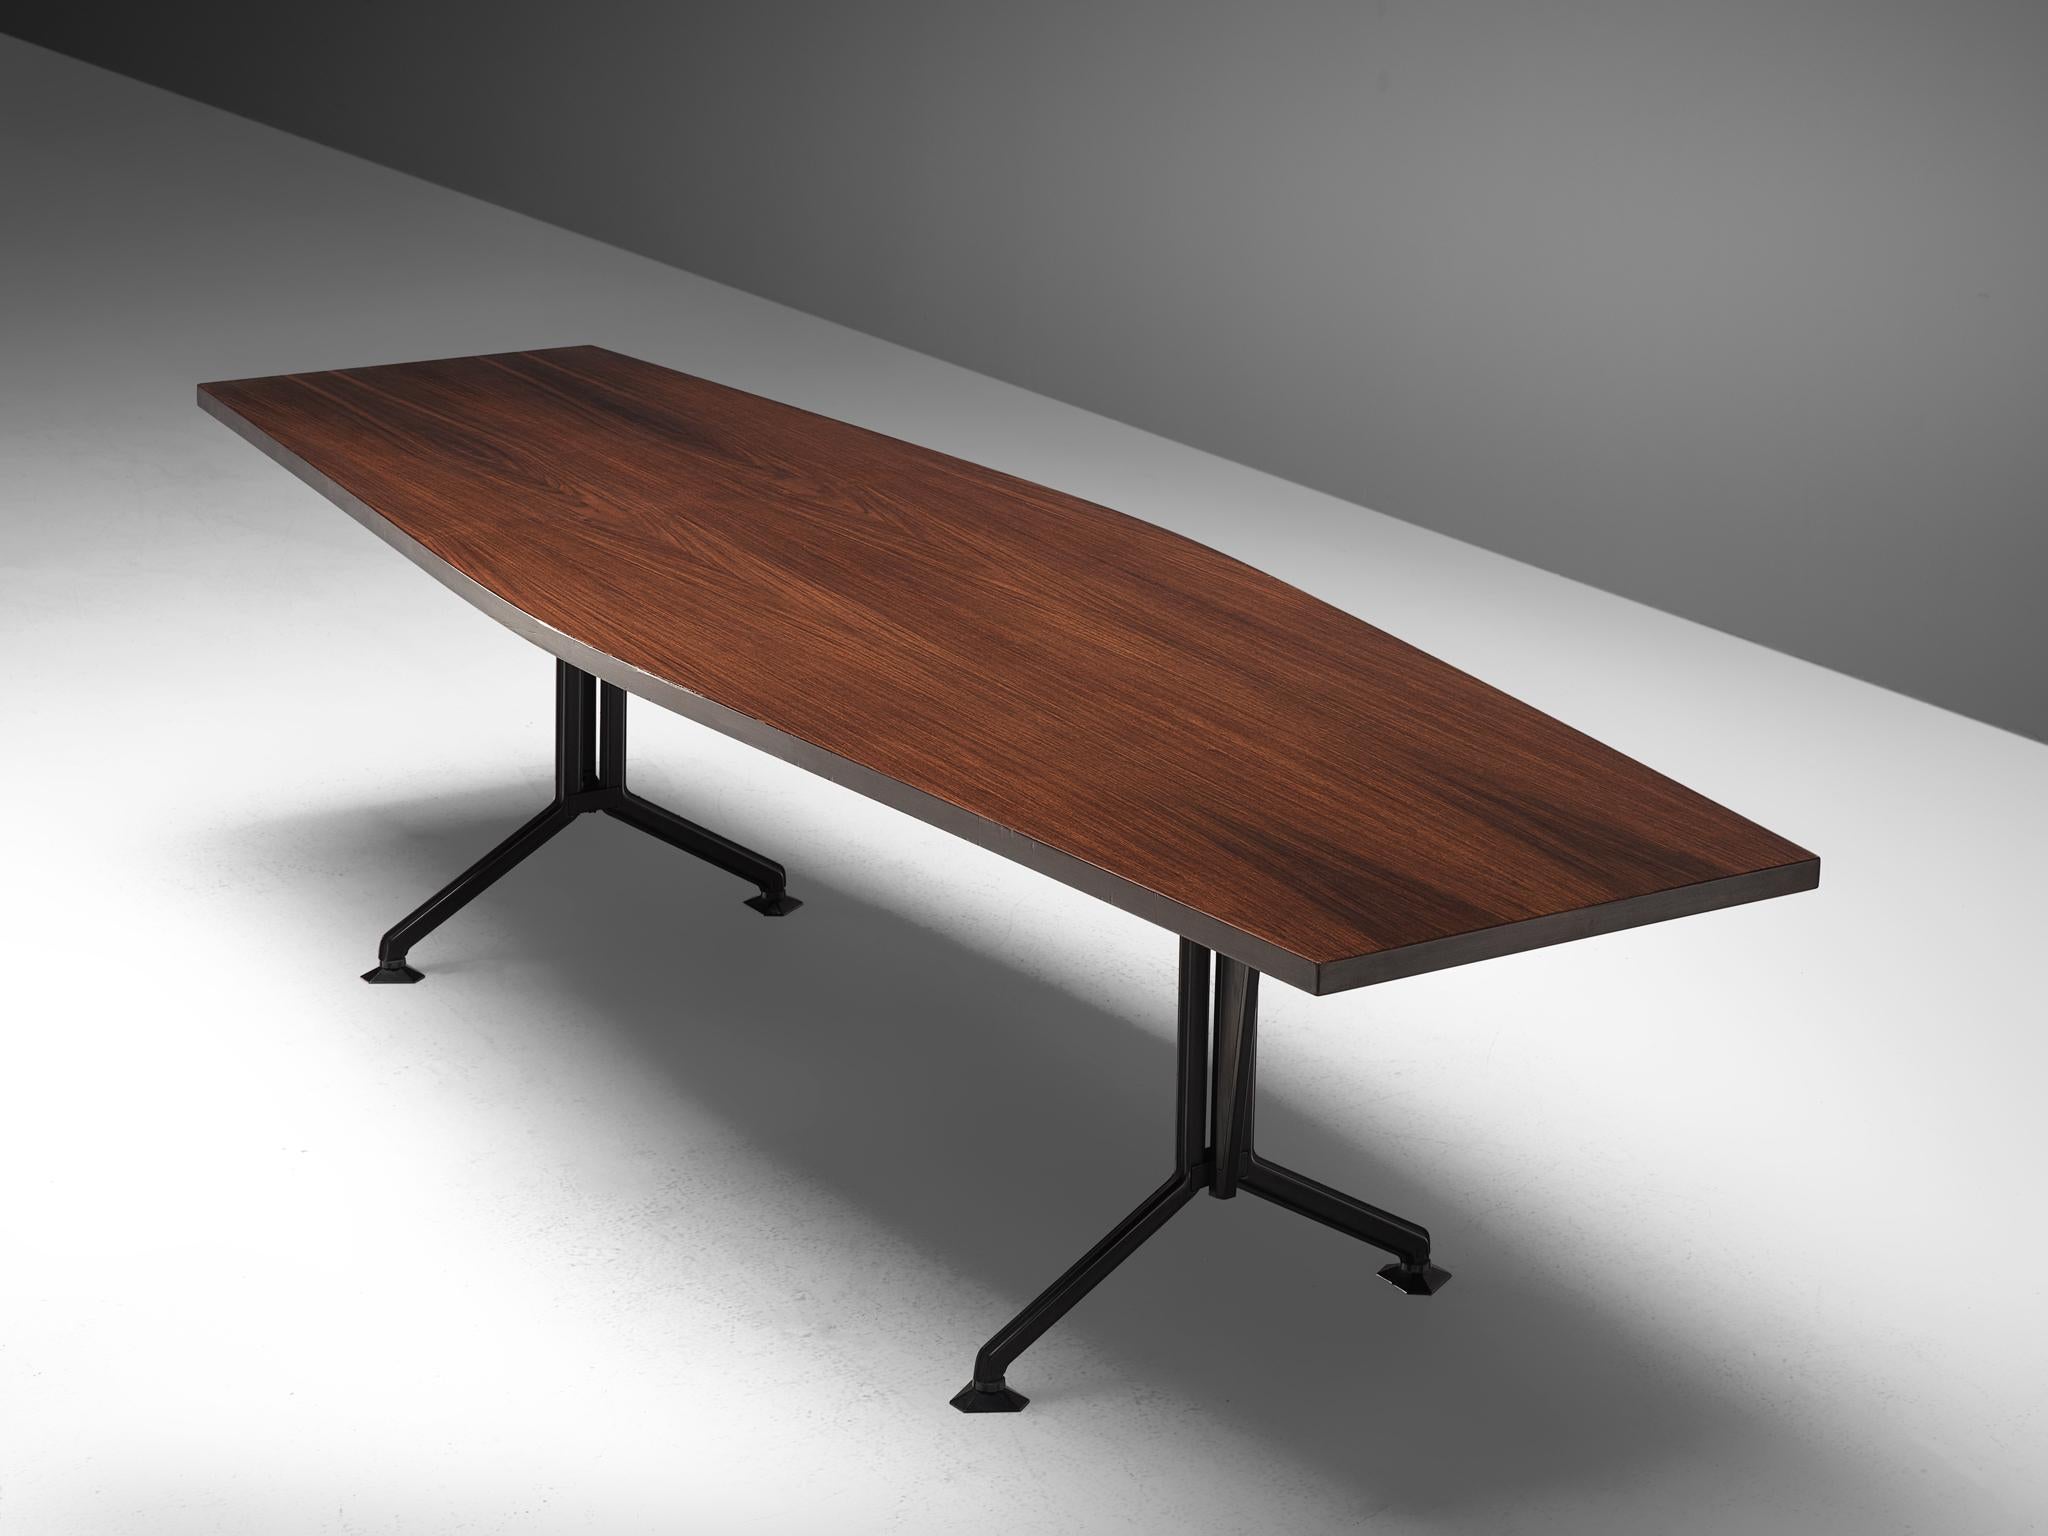 Studio BBPR for Olivetti, conference table, rosewood and metal, Italy, 1960s

This high quality conference table is part of the office furniture Line ‘Arco’ by Studio BBPR, designed in the 1960s. The supporting frames are executed in black